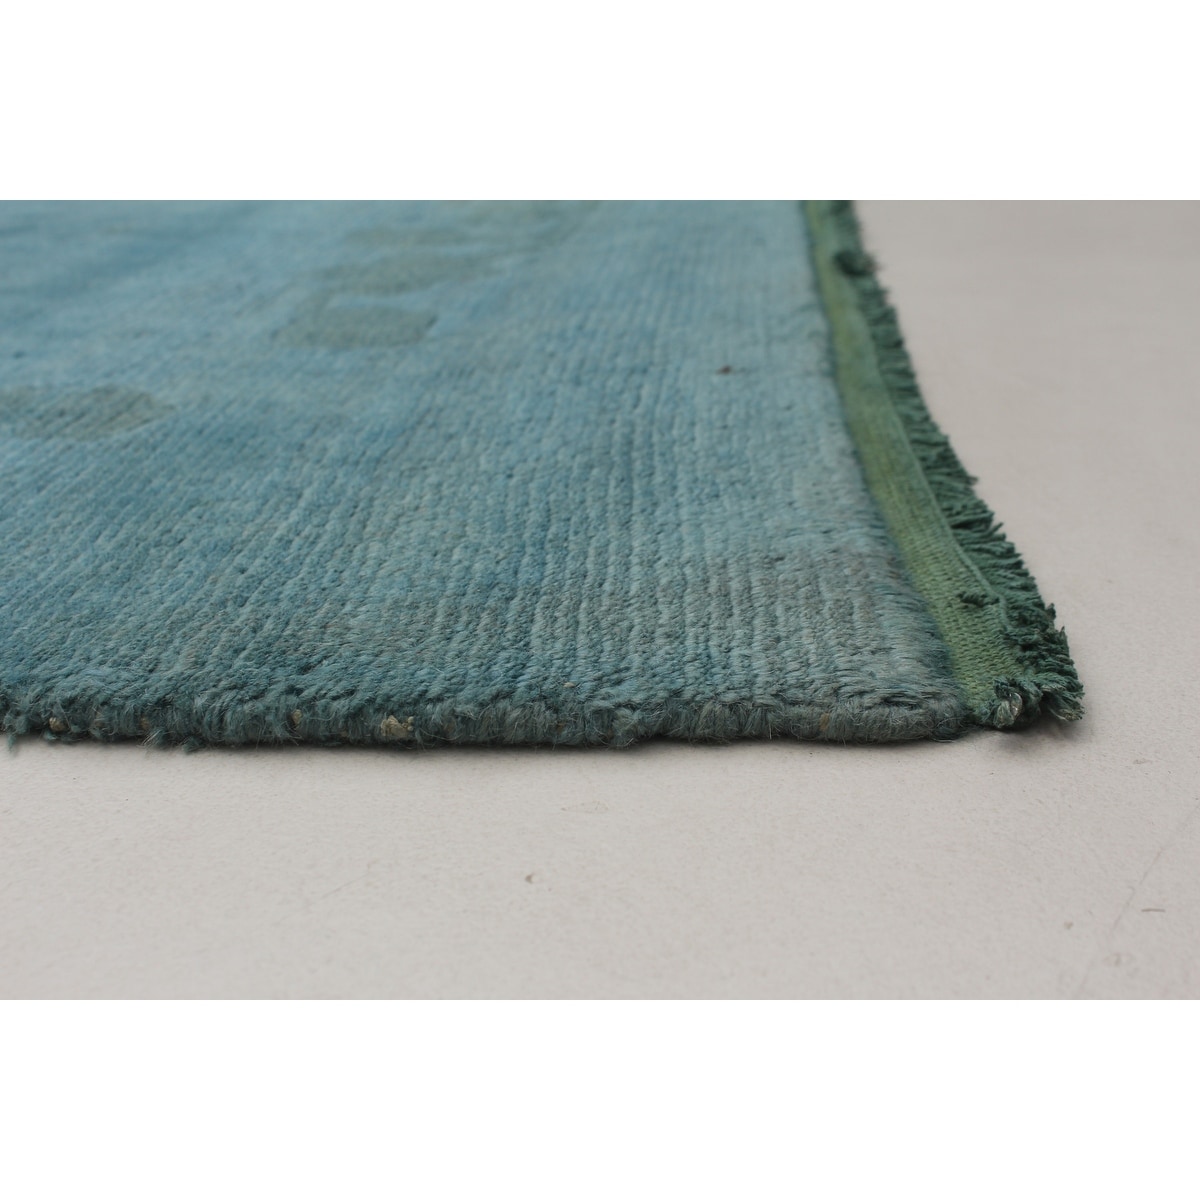 ECARPETGALLERY Hand-Knotted Color Transition Sky Blue Wool Rug - 5'11 x 8'9